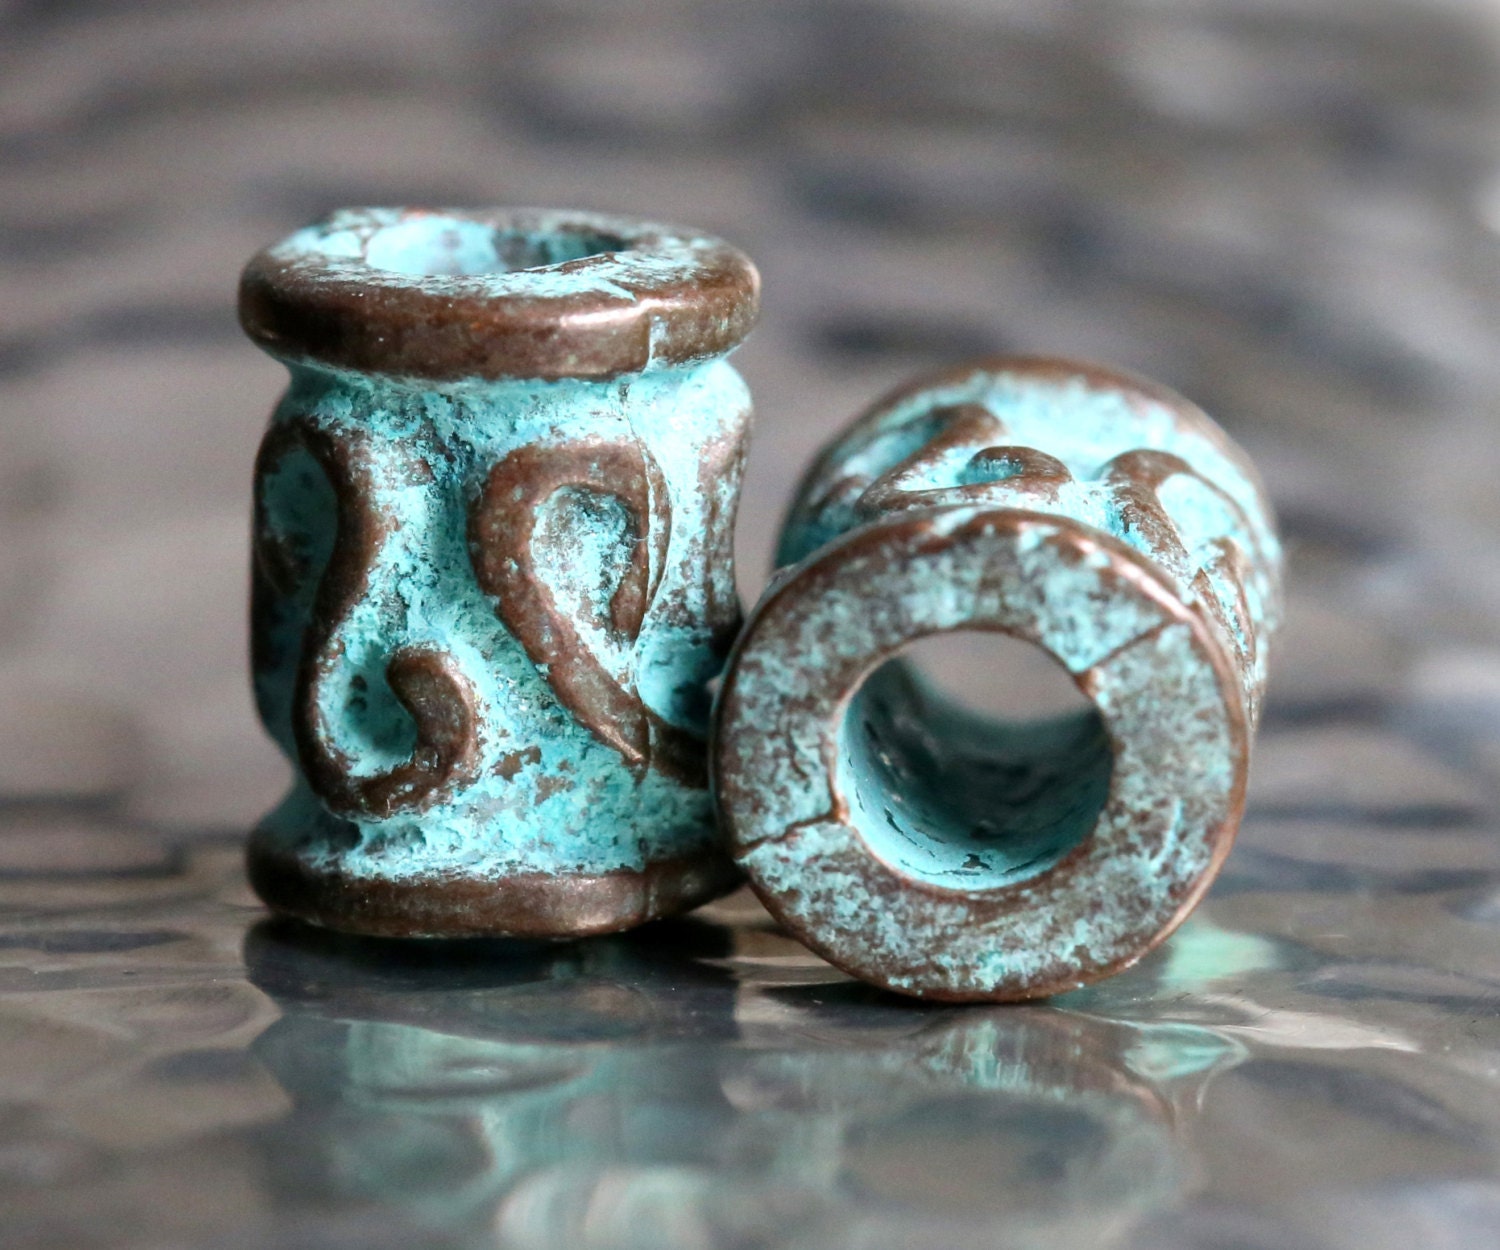 7mm 10pc Bali Style Antique Copper Beads for Jewelry Making, Copperspacer  Beads, Jewelry Findings 